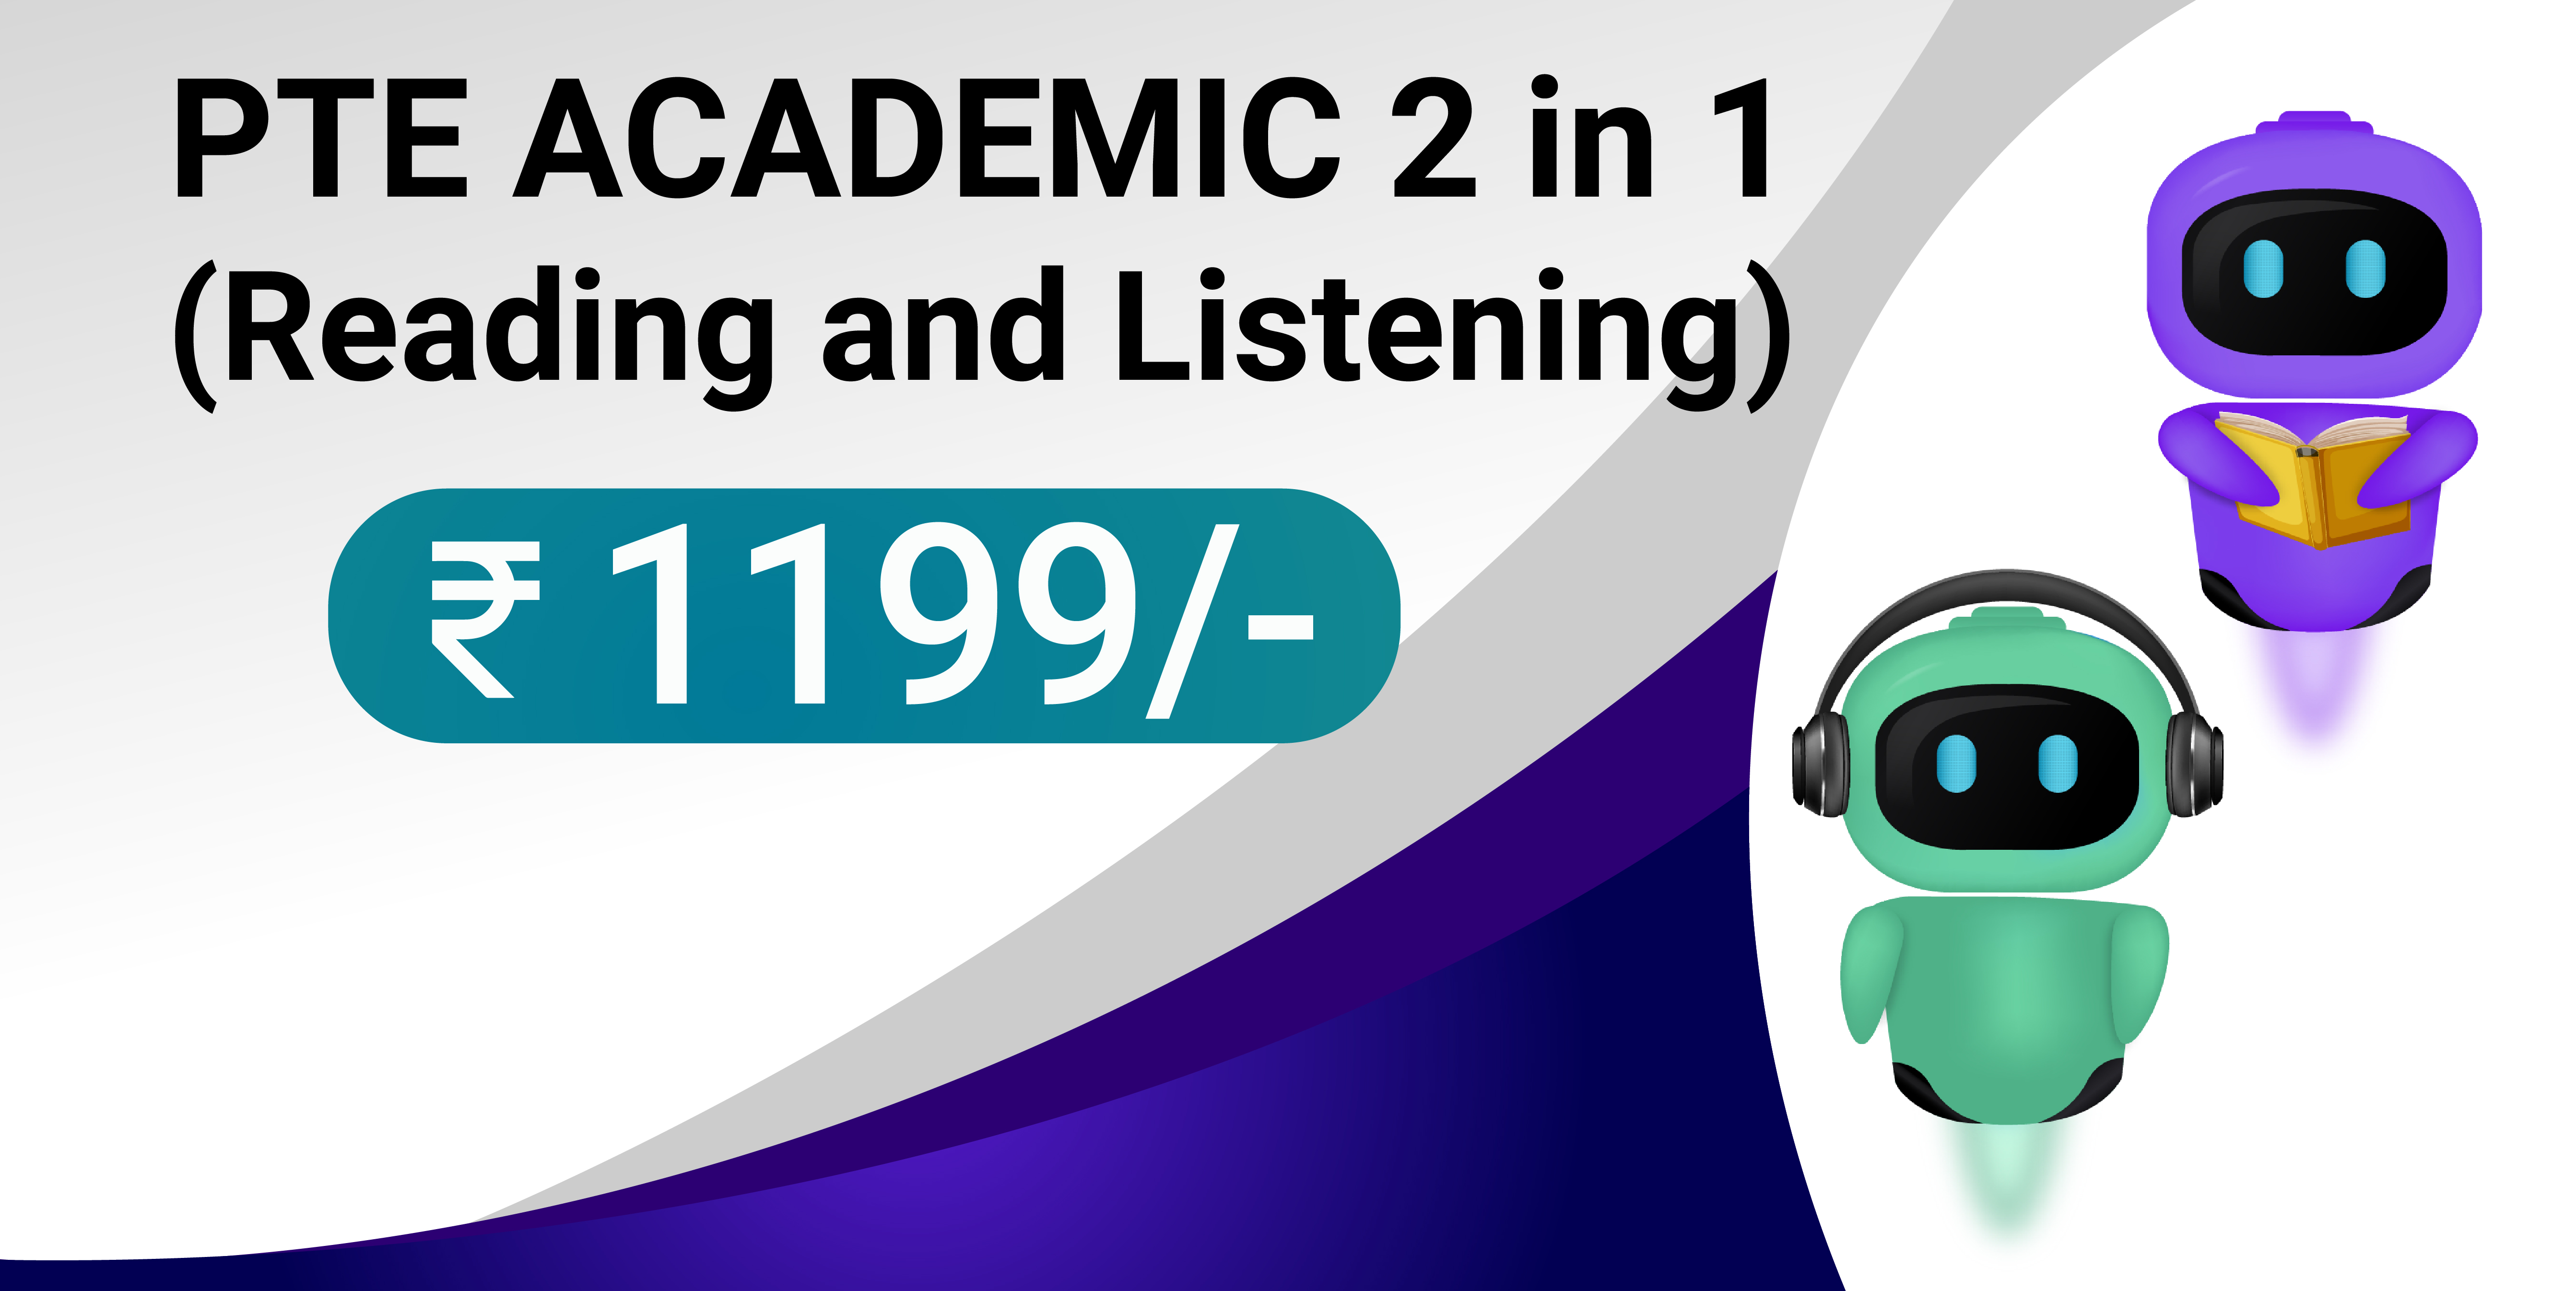 PTE ACADEMIC 2 in 1 (Reading and Listening)